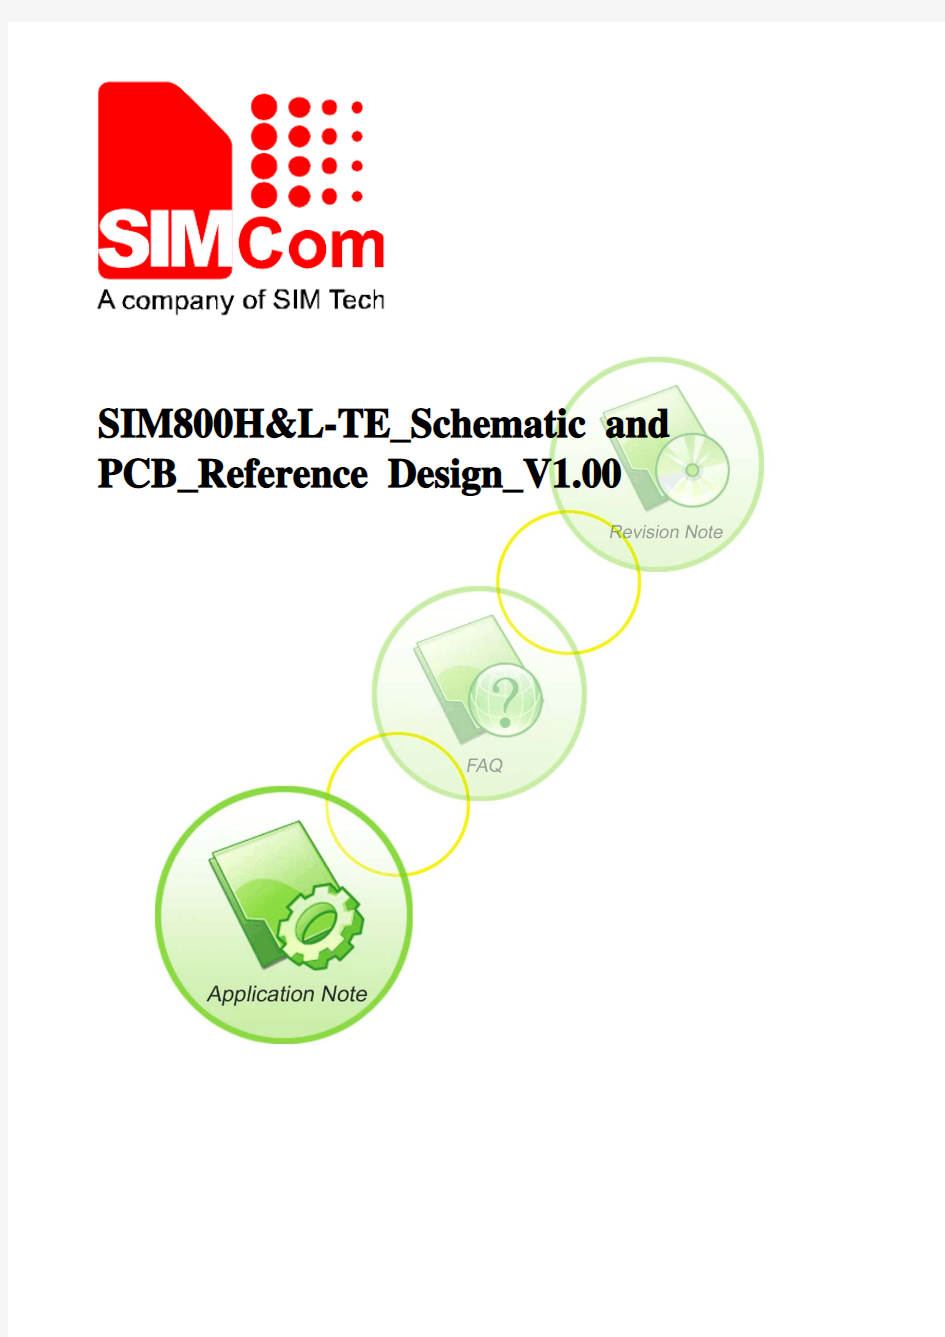 SIM800H-TE_Schematic and PCB_Reference Design_V1.00